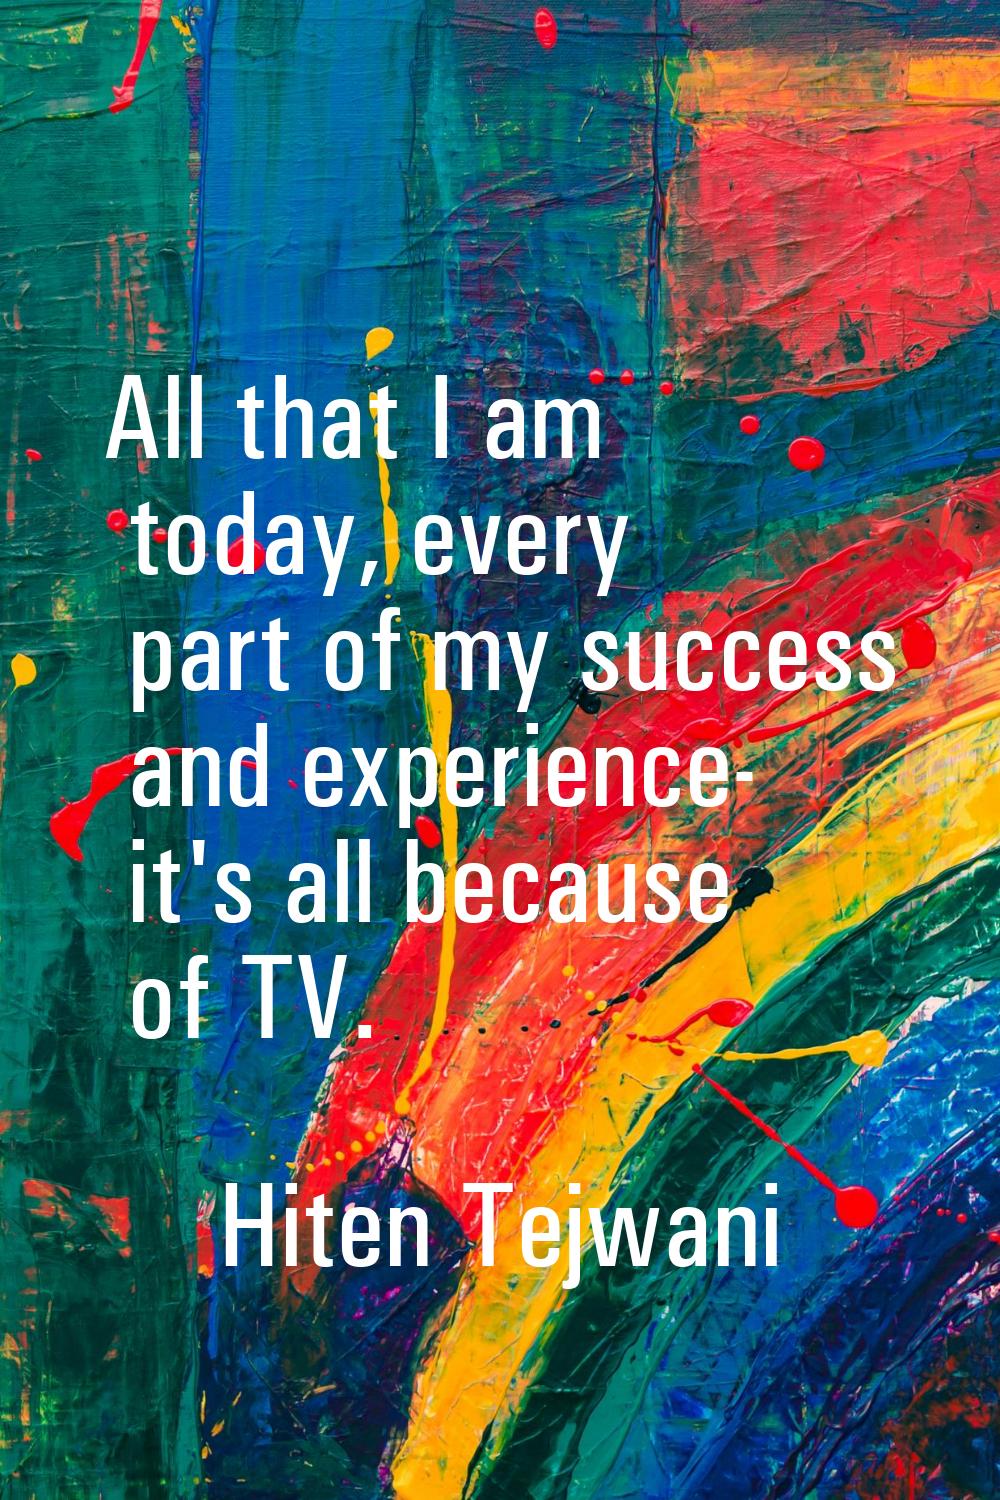 All that I am today, every part of my success and experience- it's all because of TV.